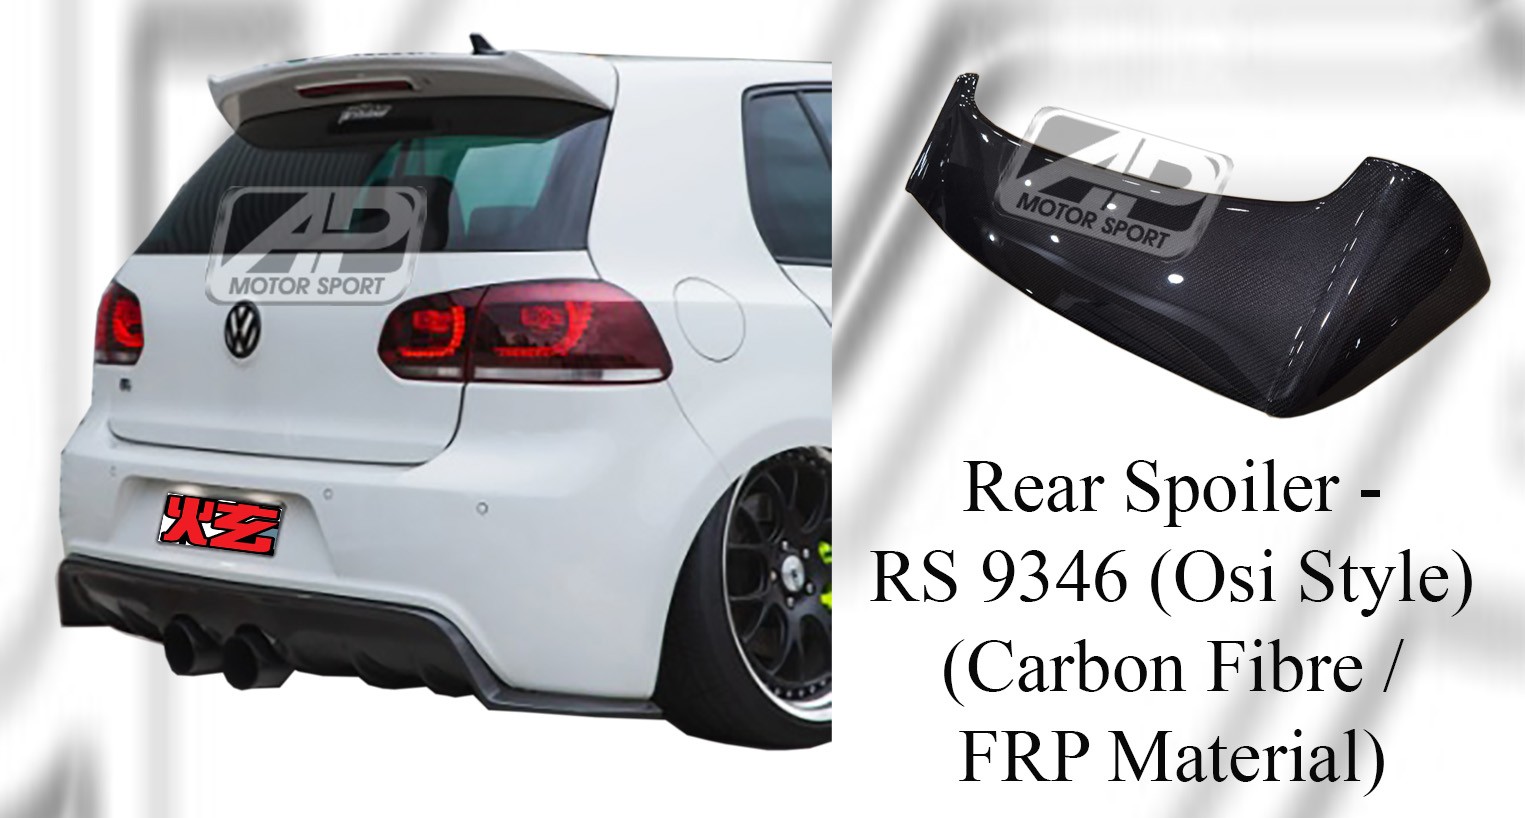 Volkswagen MK6 Osi Style Rear Spoiler (Carbon Fibre / Forged